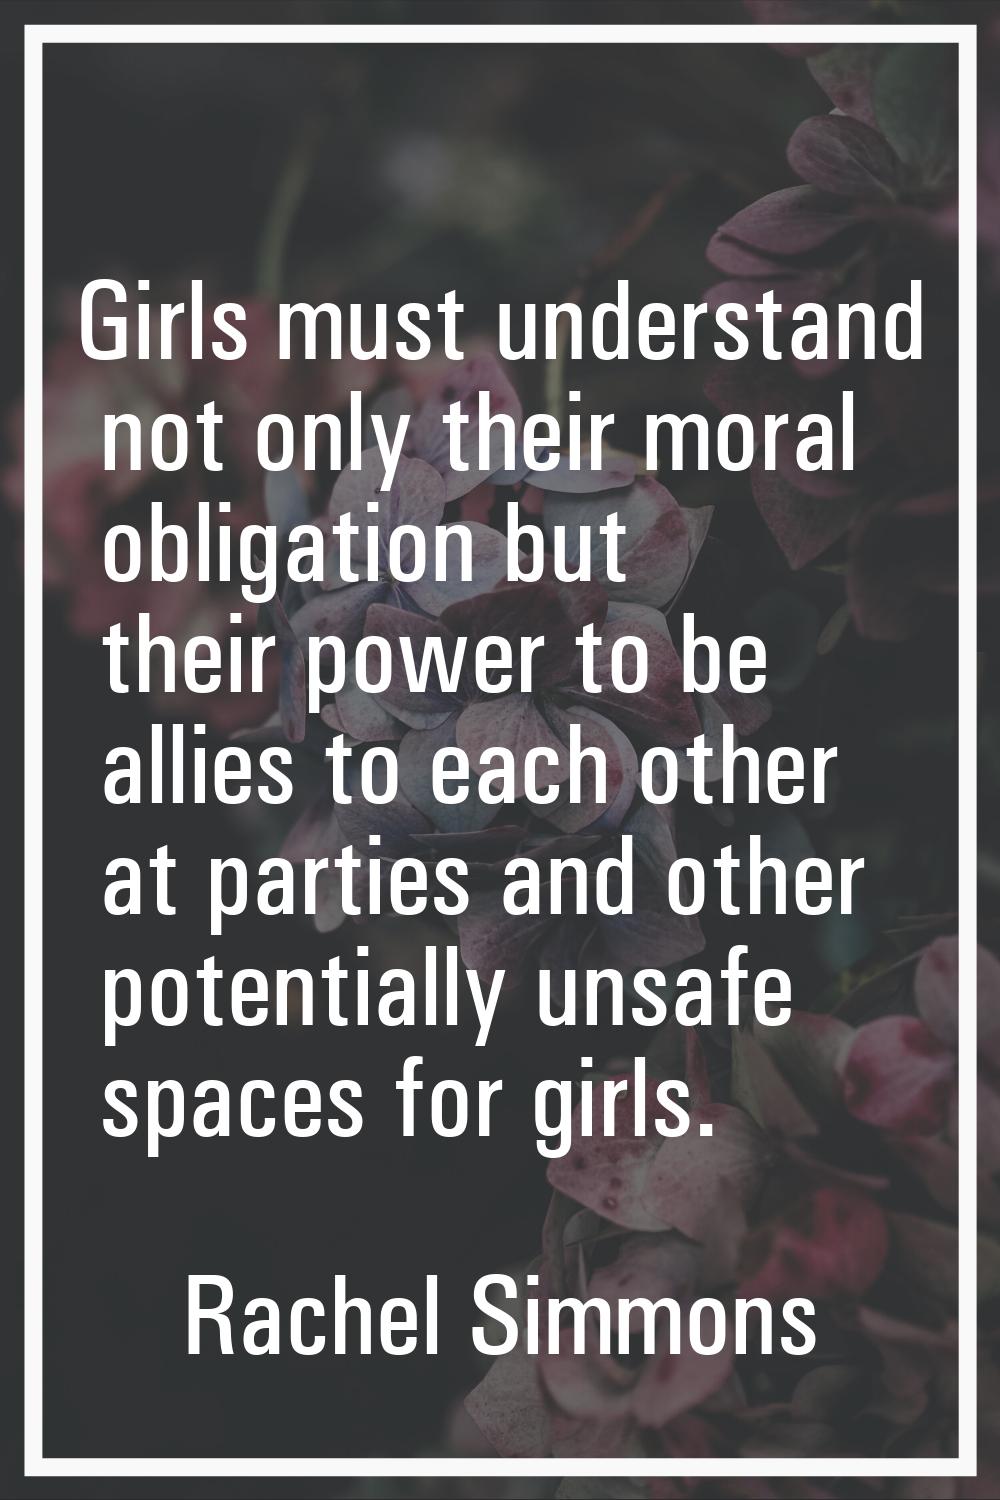 Girls must understand not only their moral obligation but their power to be allies to each other at